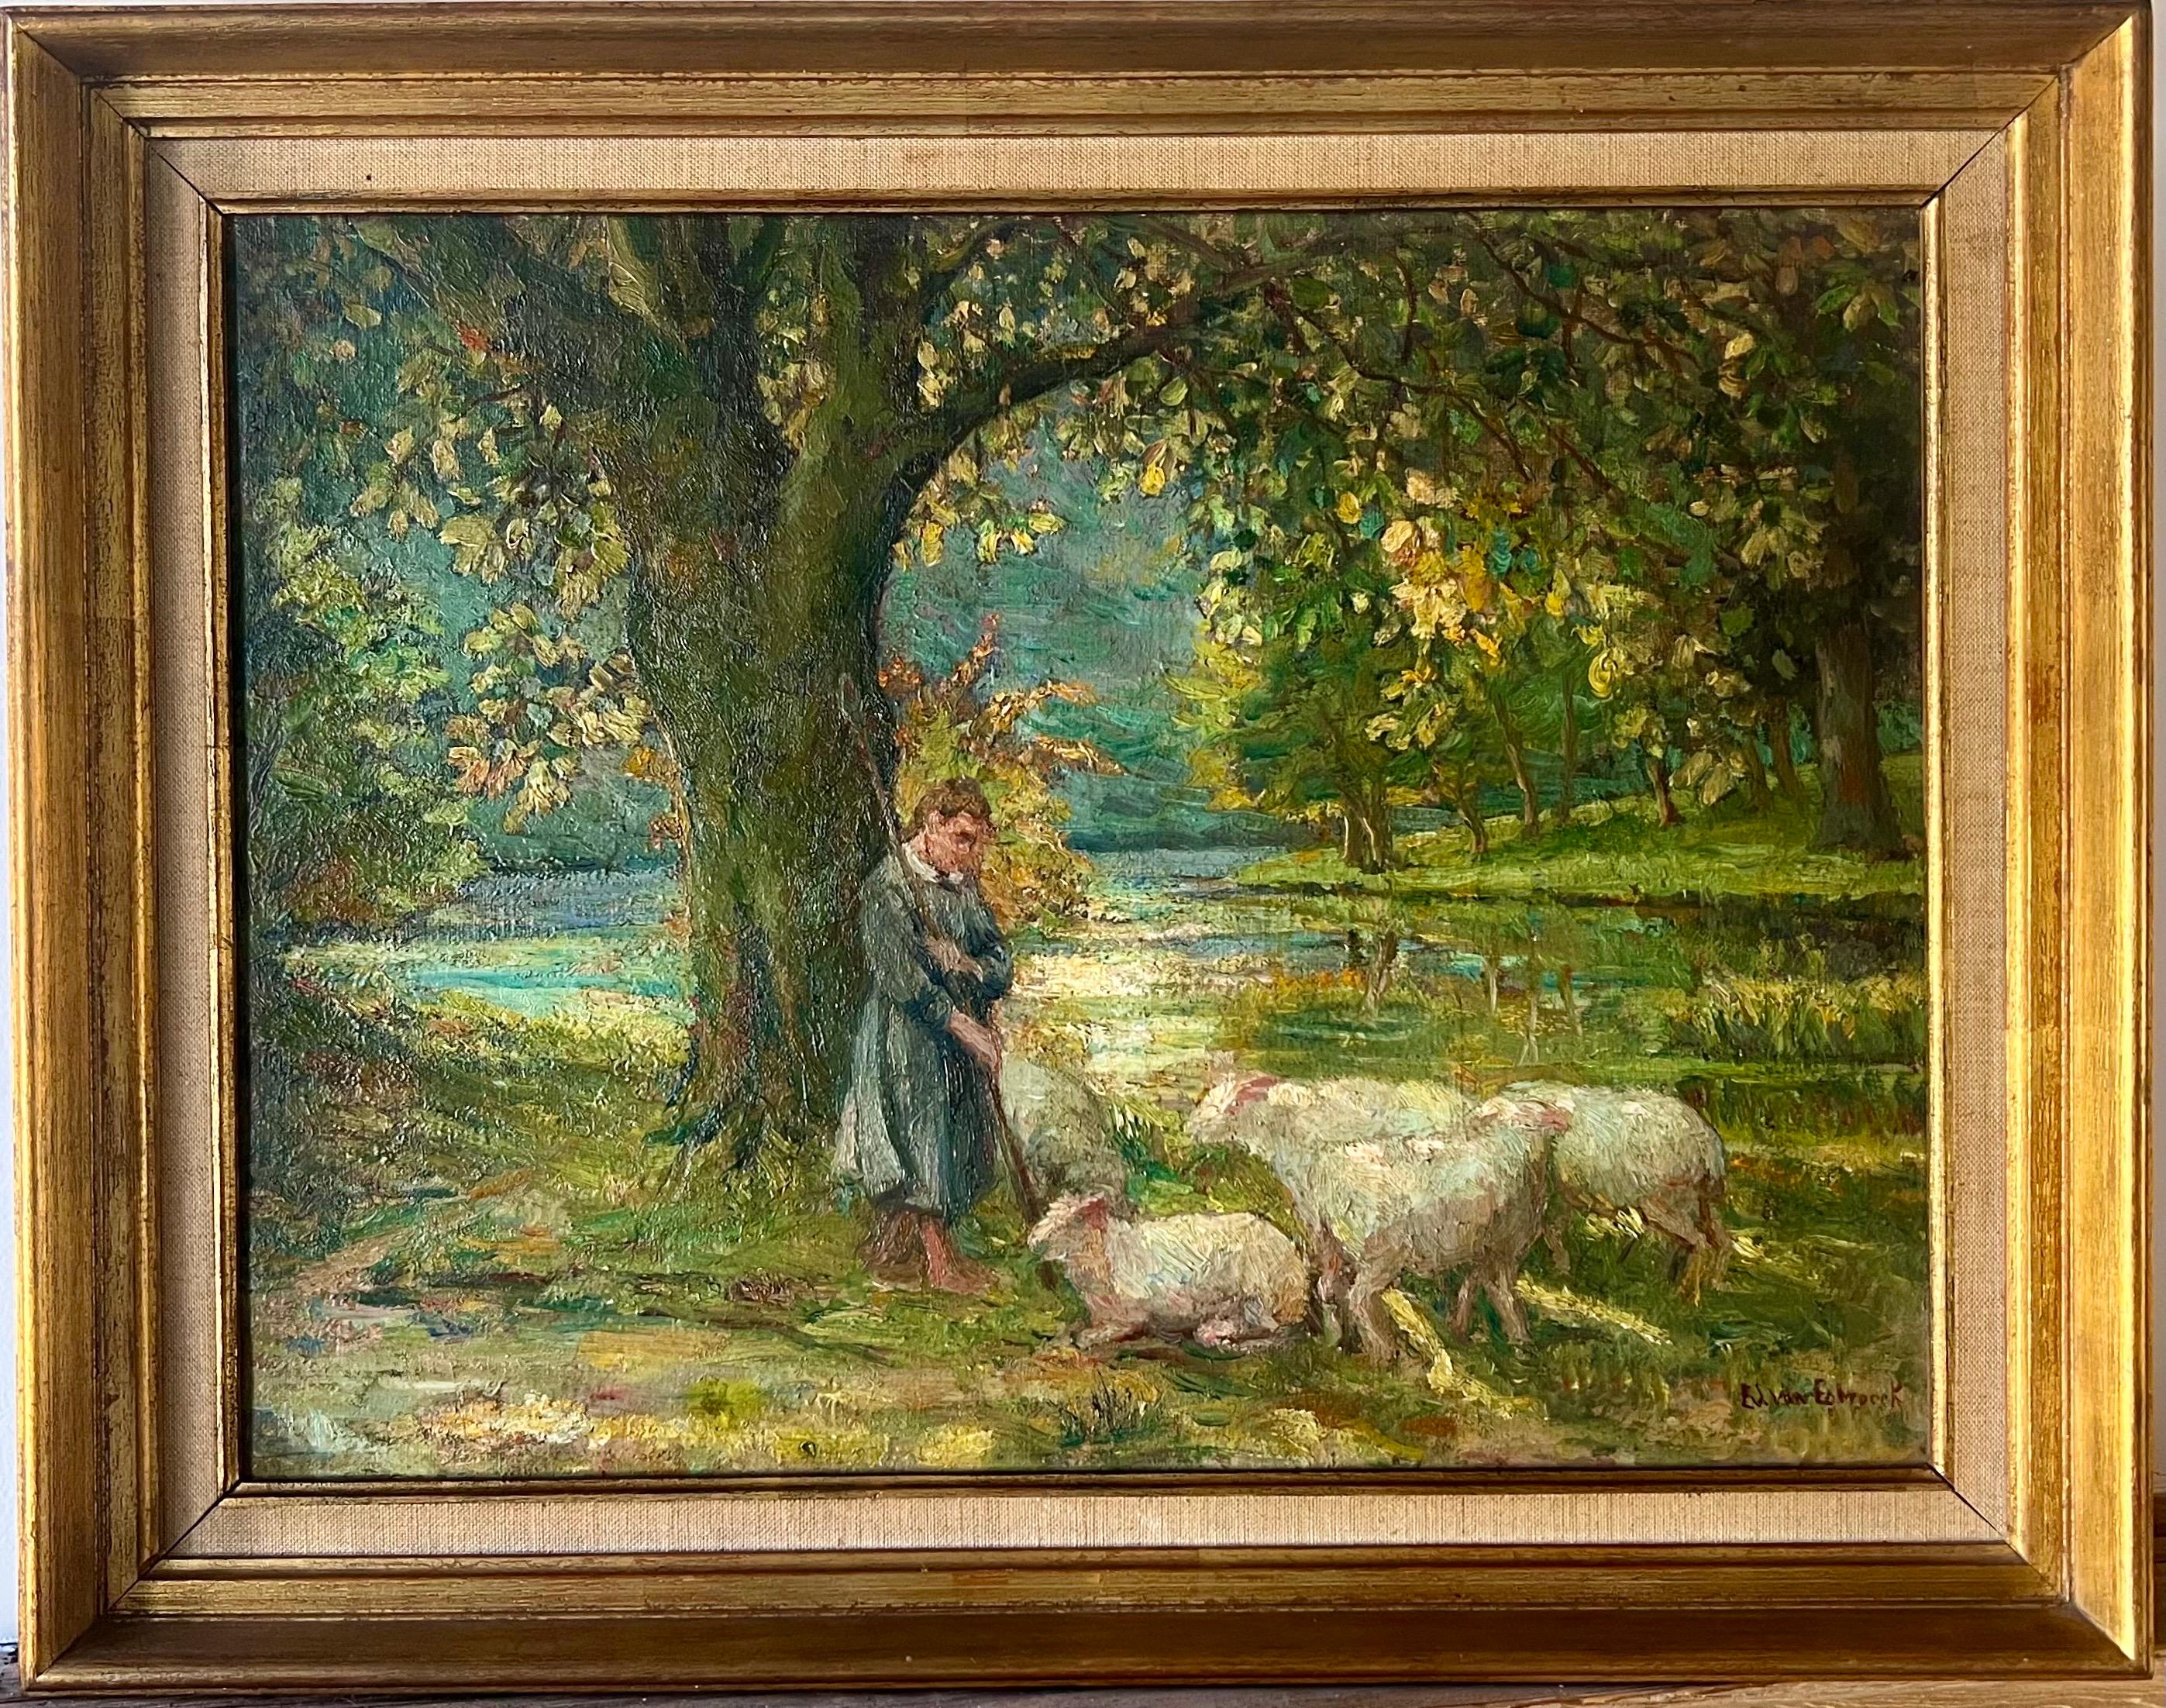 19th century impressionist painting - Summer in the Countryside , a shepherdess 